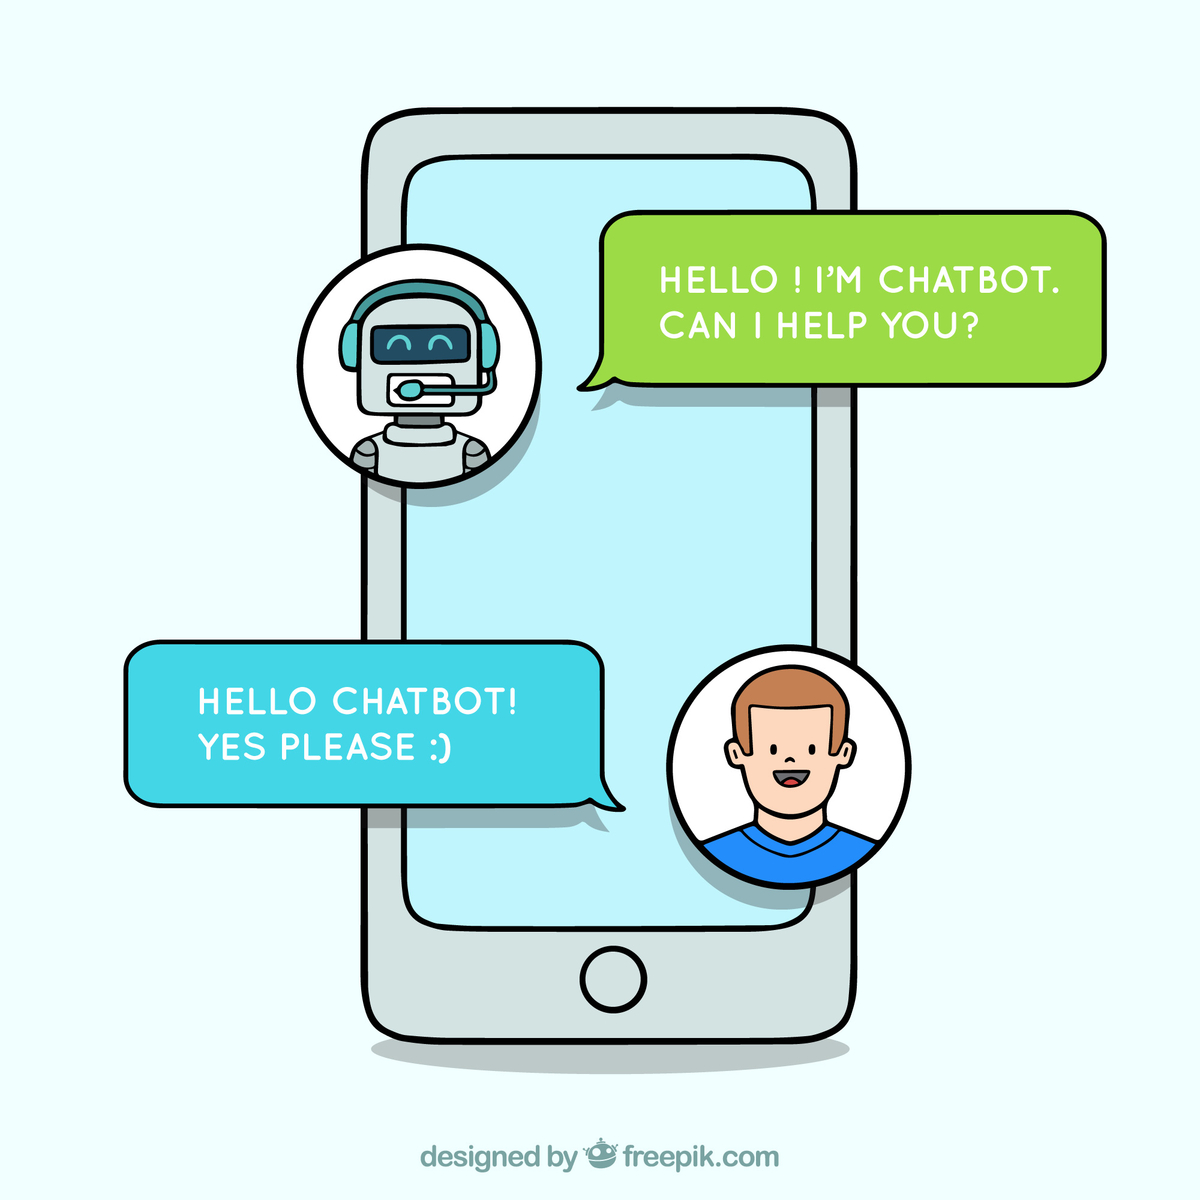 What are chatbots